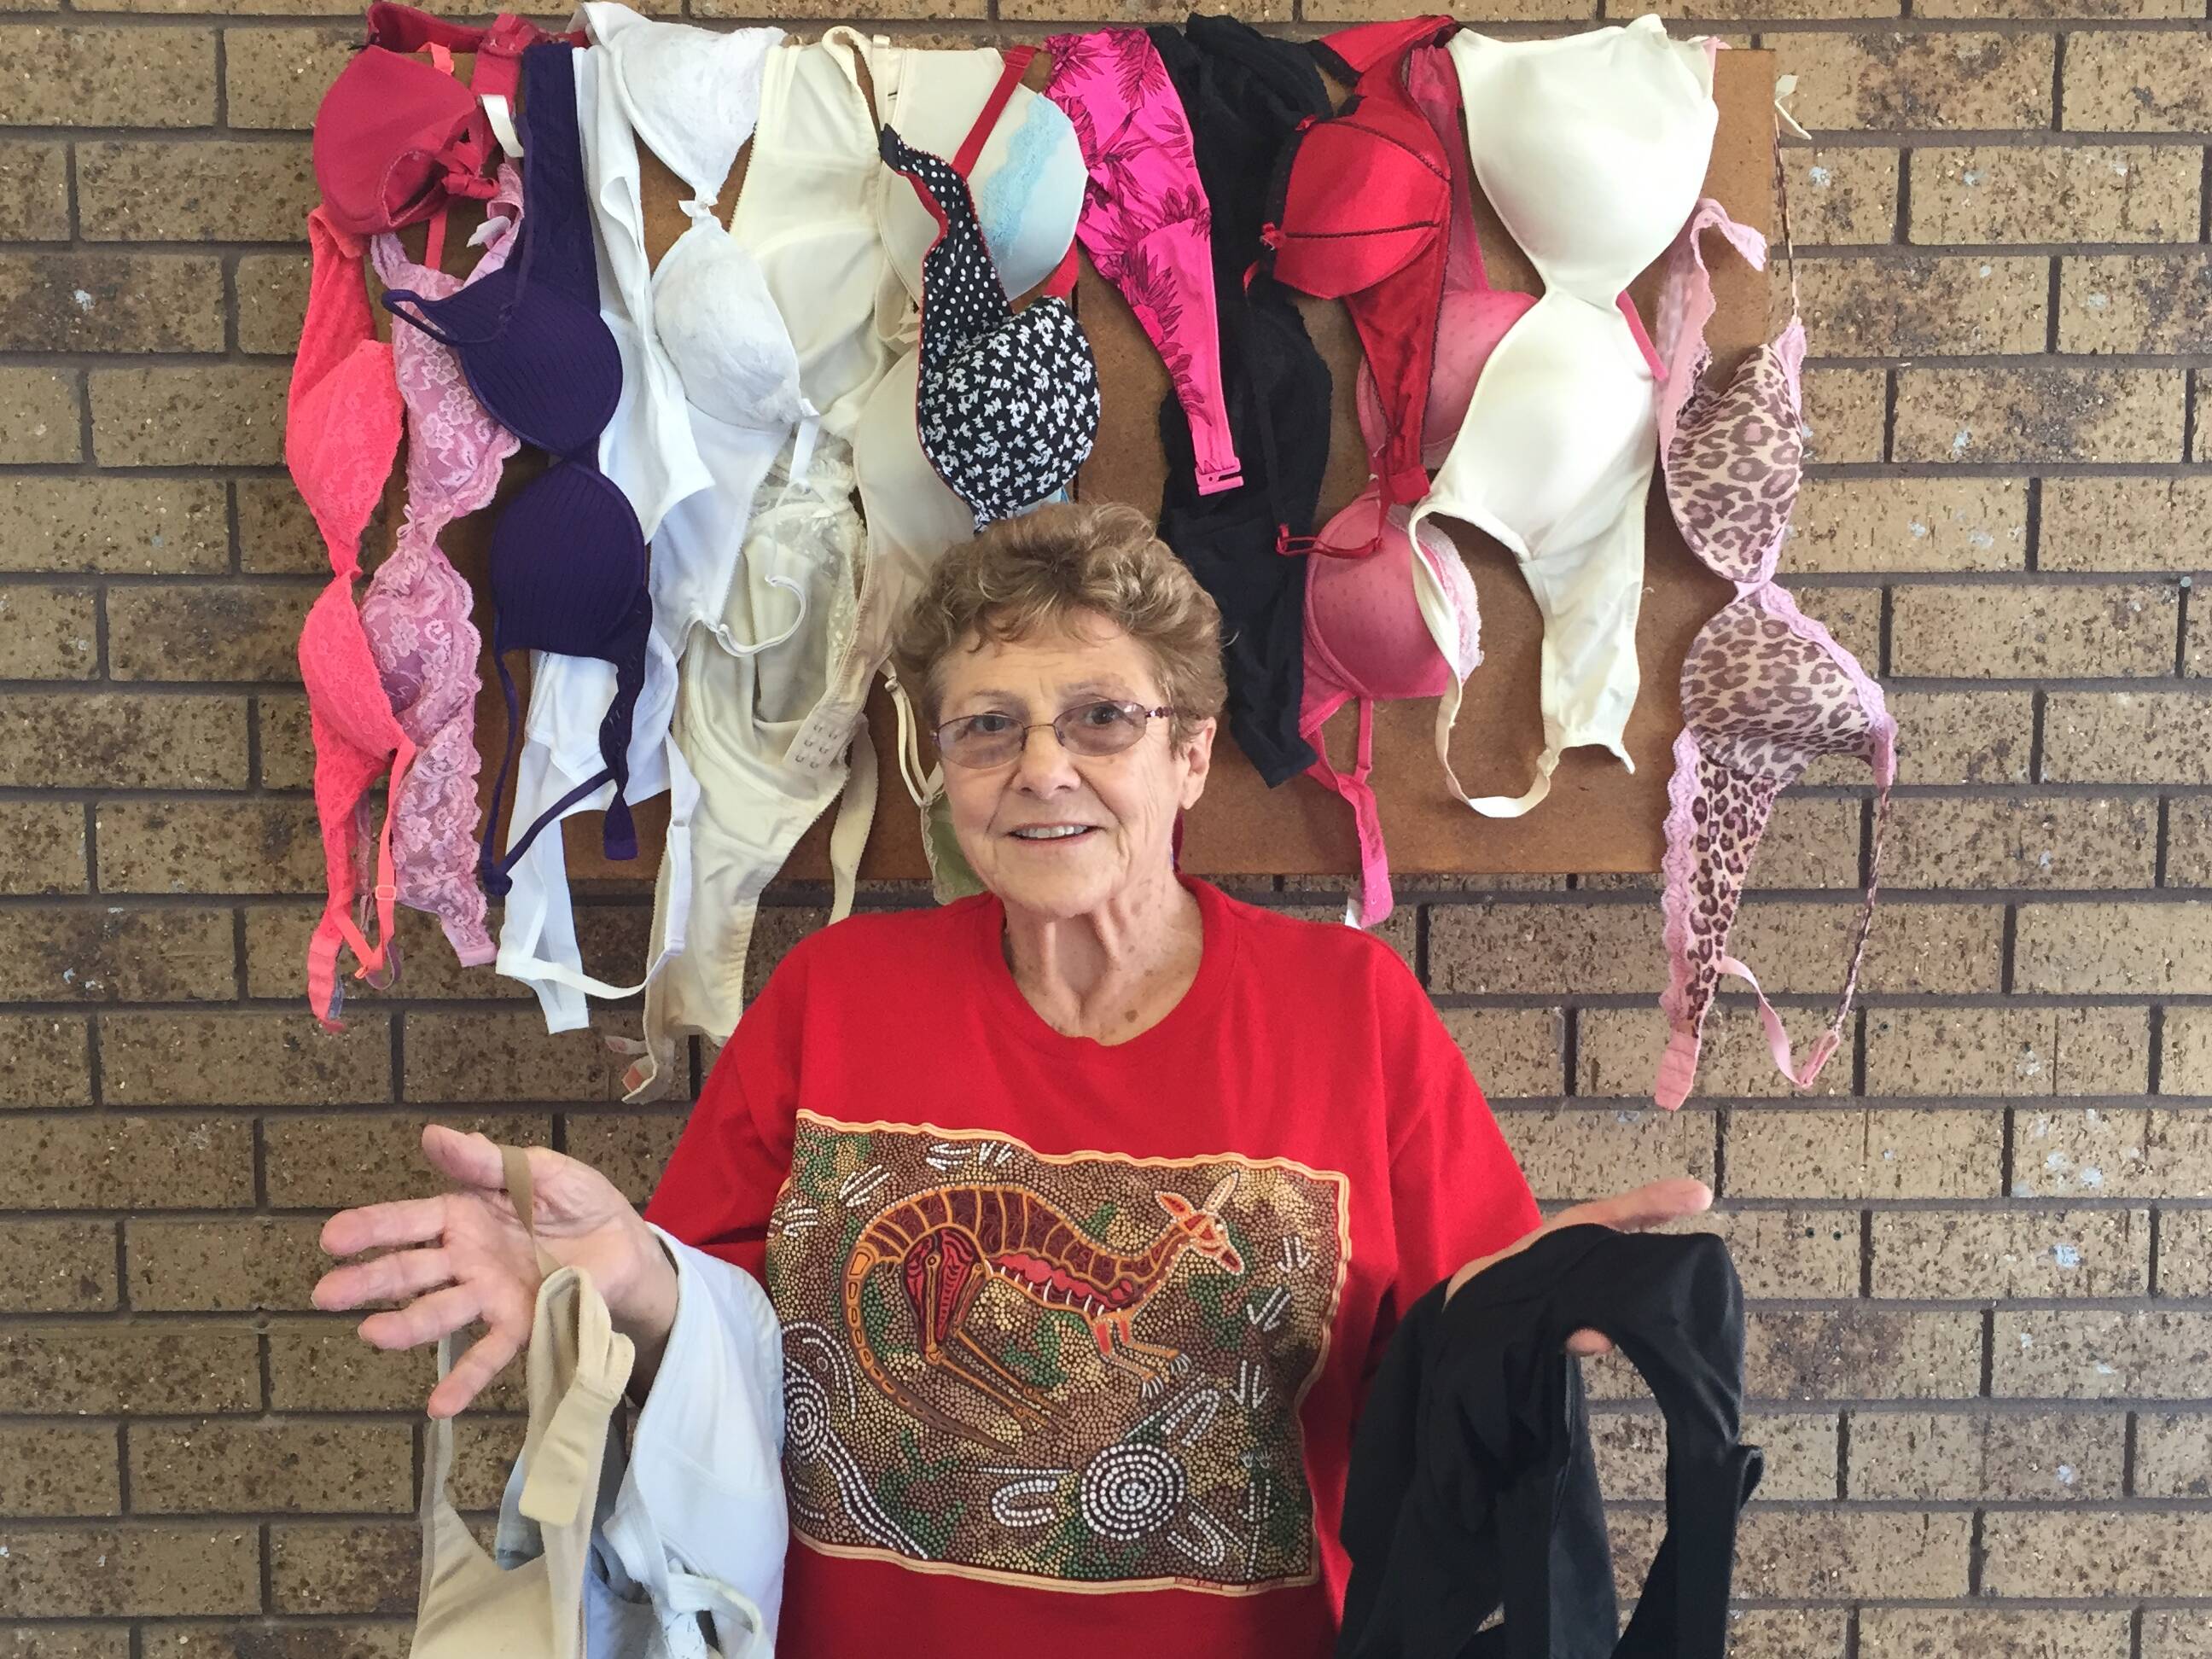 Rotary donating bras for Operation Uplift, The Stawell Times-News